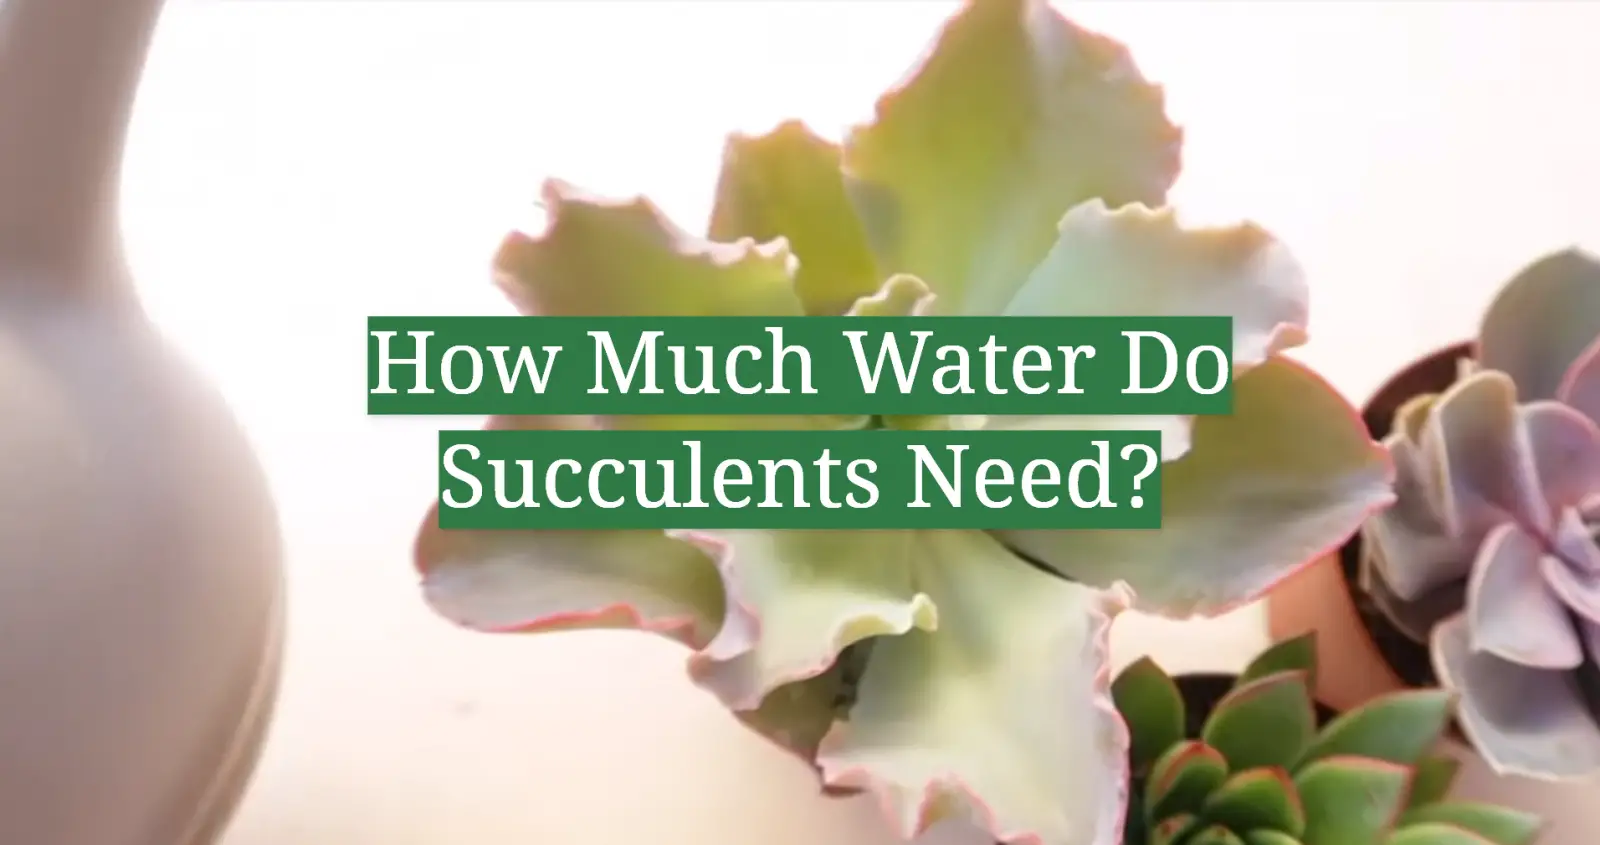 How Much Water Do Succulents Need?